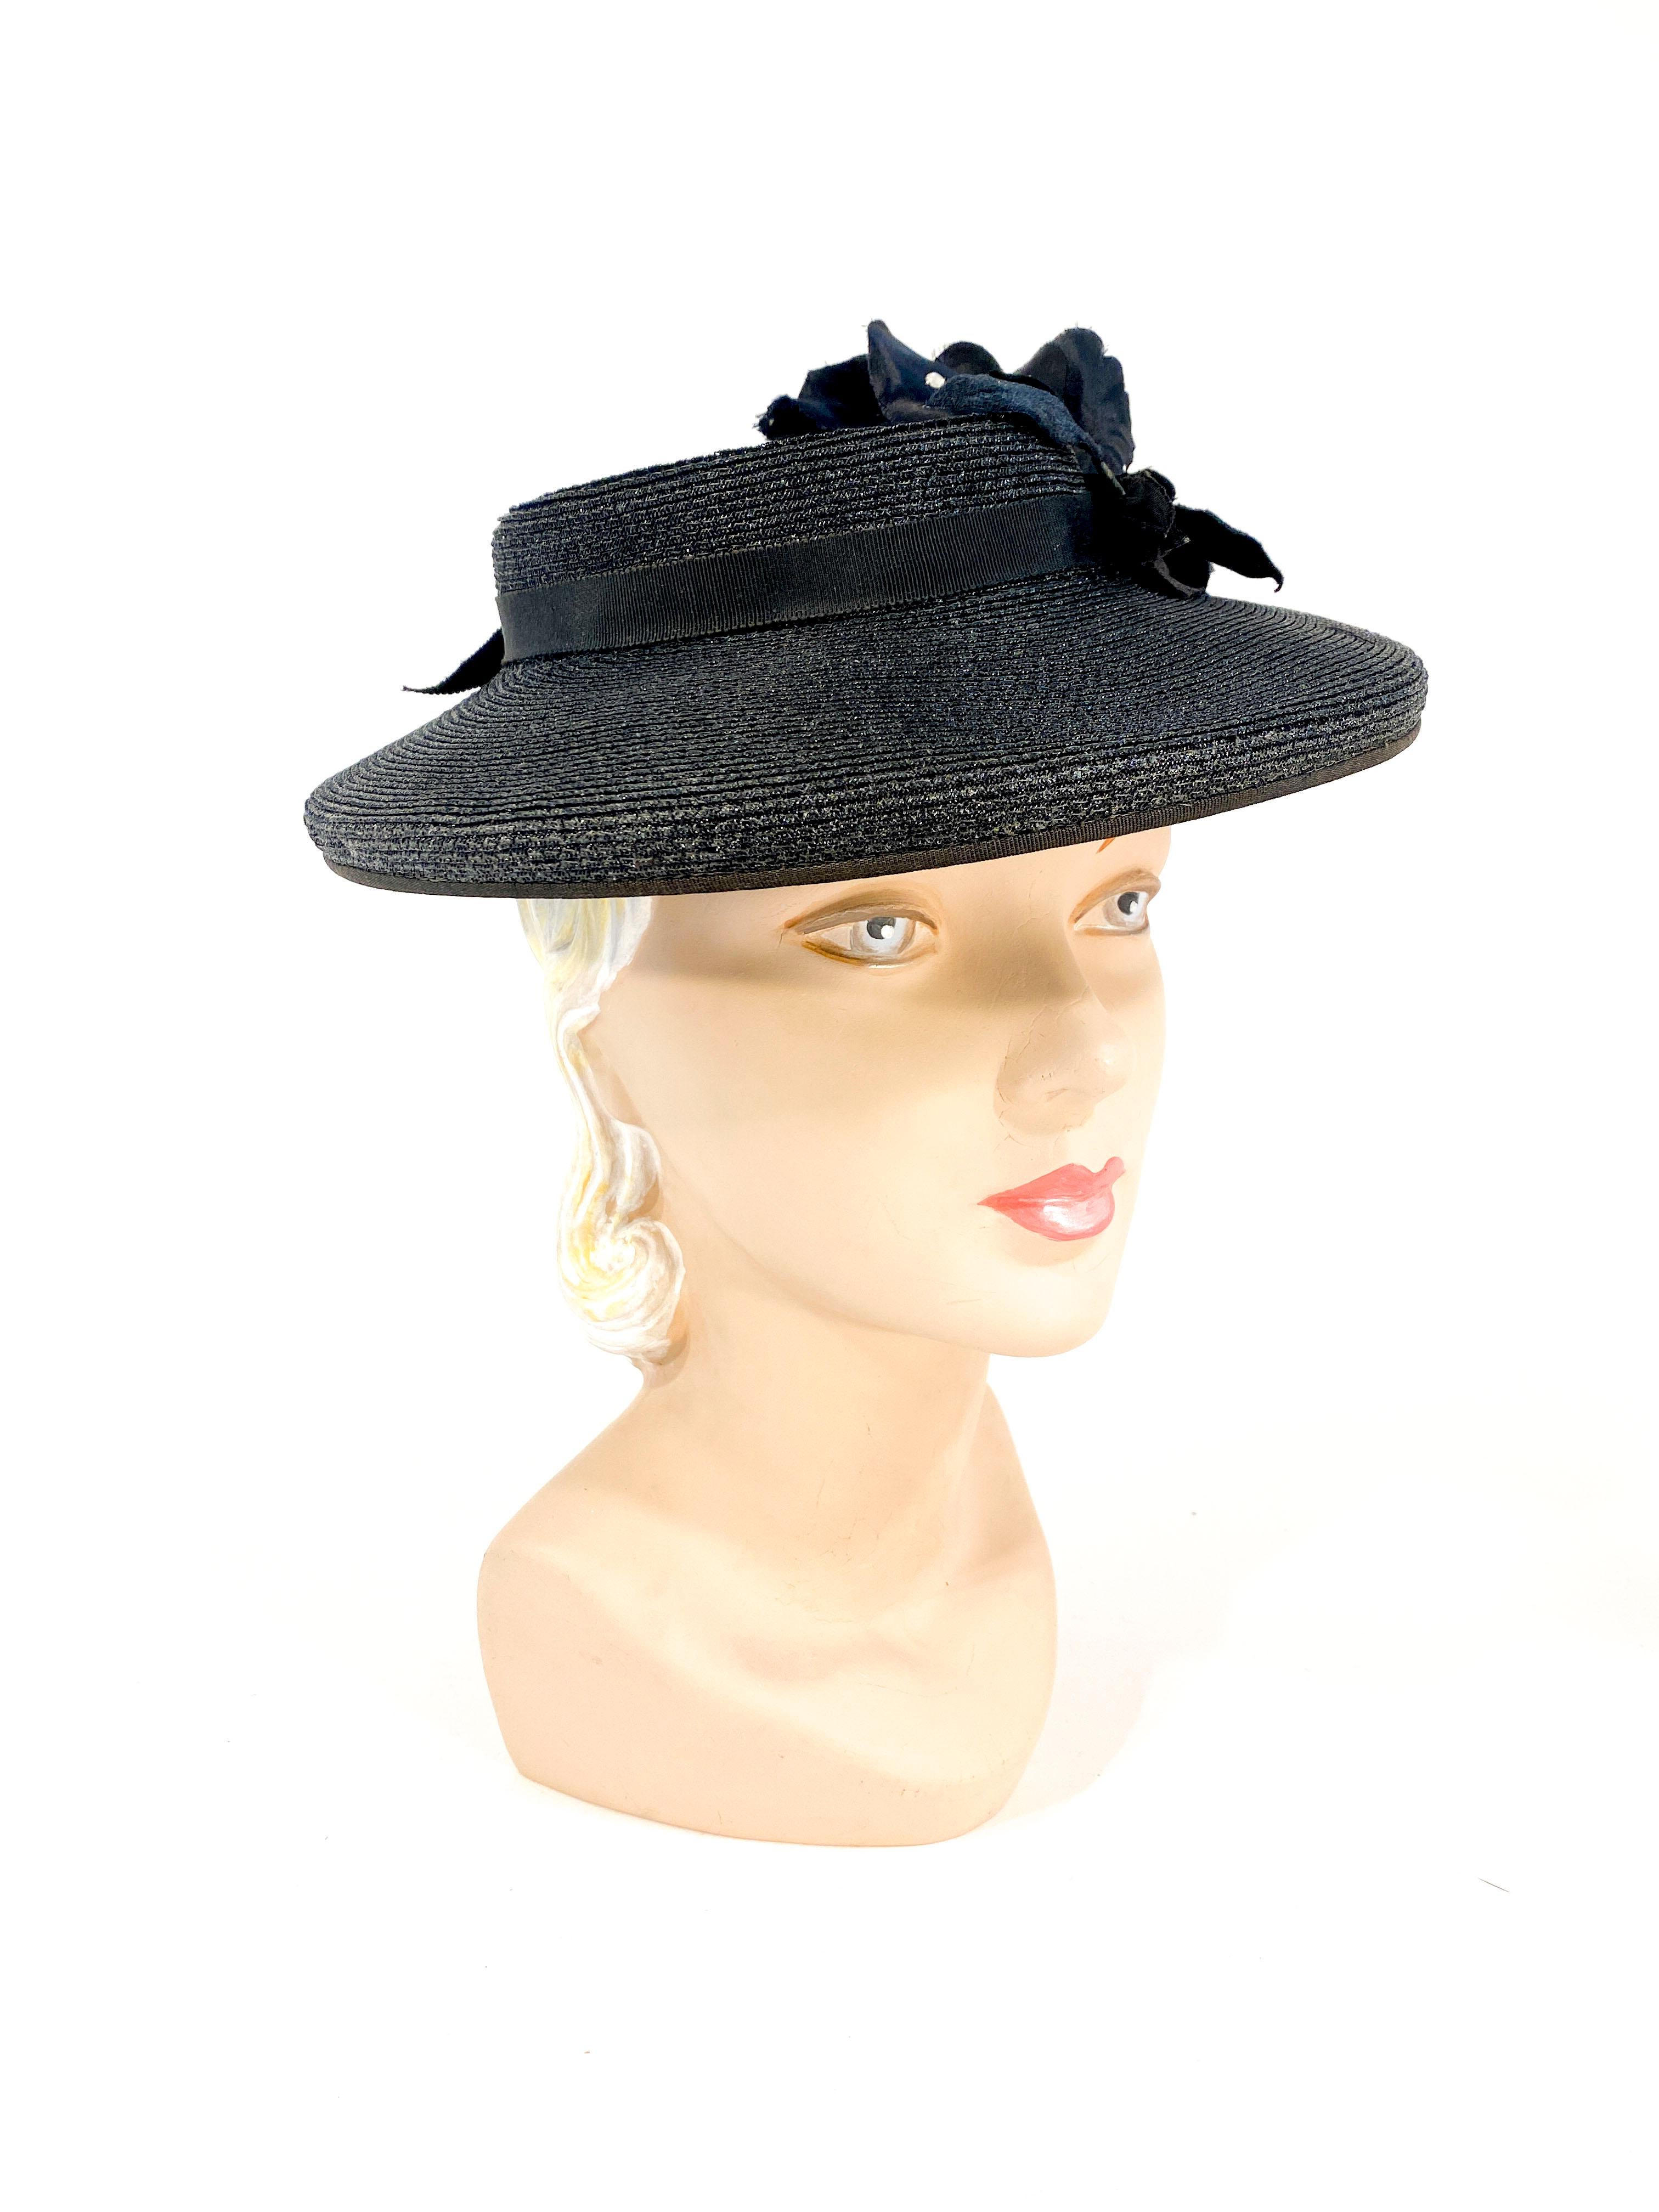 1940s black coated and woven straw hat with a shallow sculpted crown decorated with a thin grosgrain band/bow, and a large handmade silk flower touched with clear rhinestones. The brim is structured with a mild curve. 